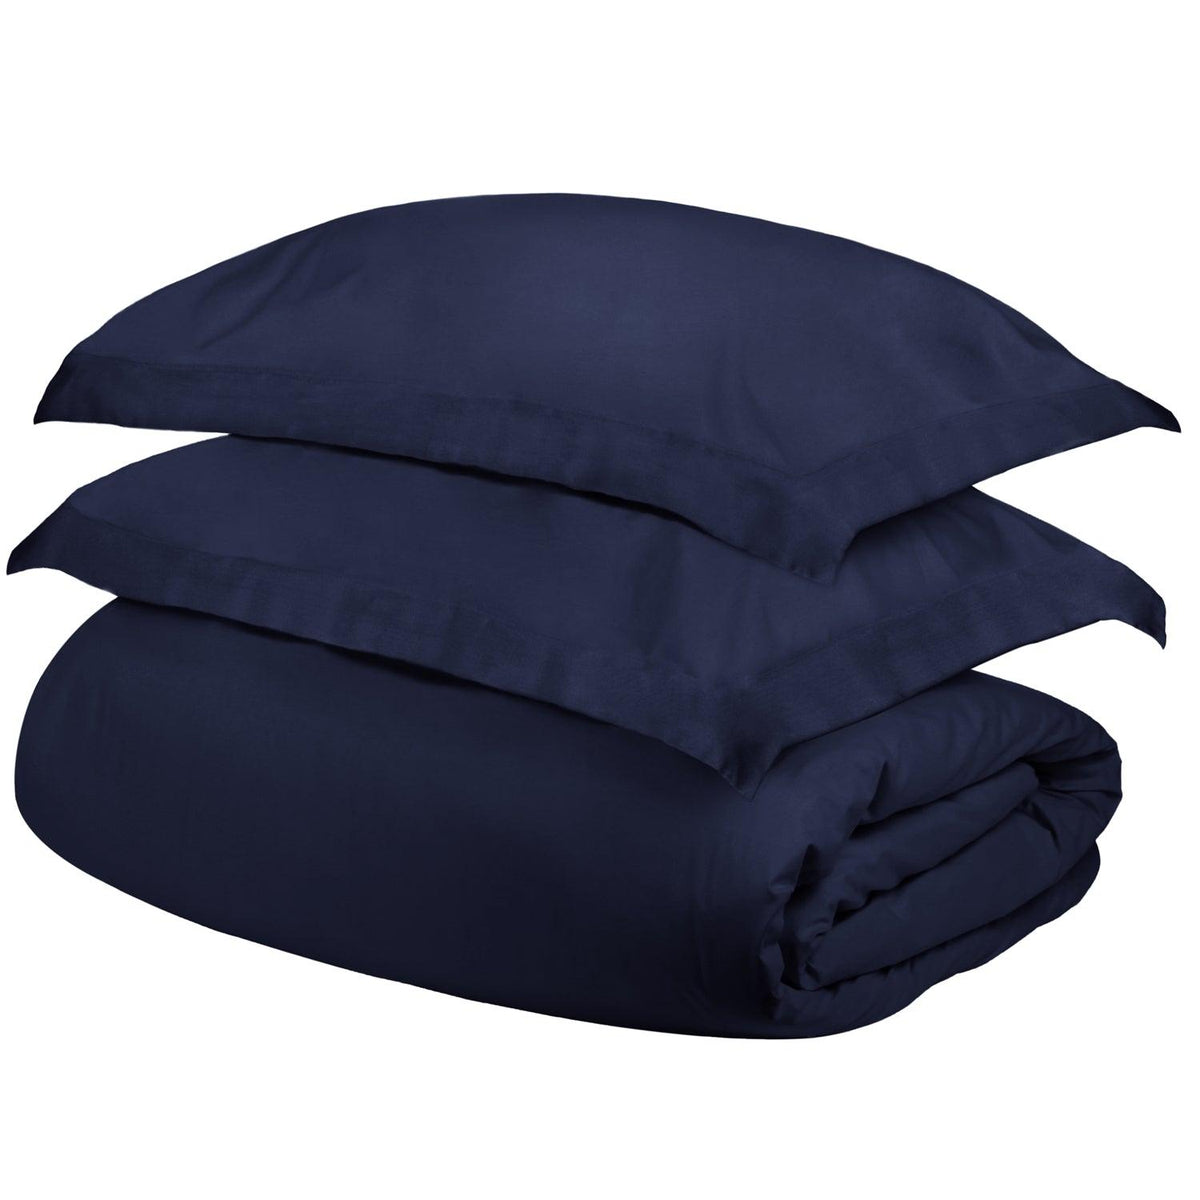  Superior Egyptian Cotton 400 Thread Count Solid Duvet Cover Set - Navy Blue